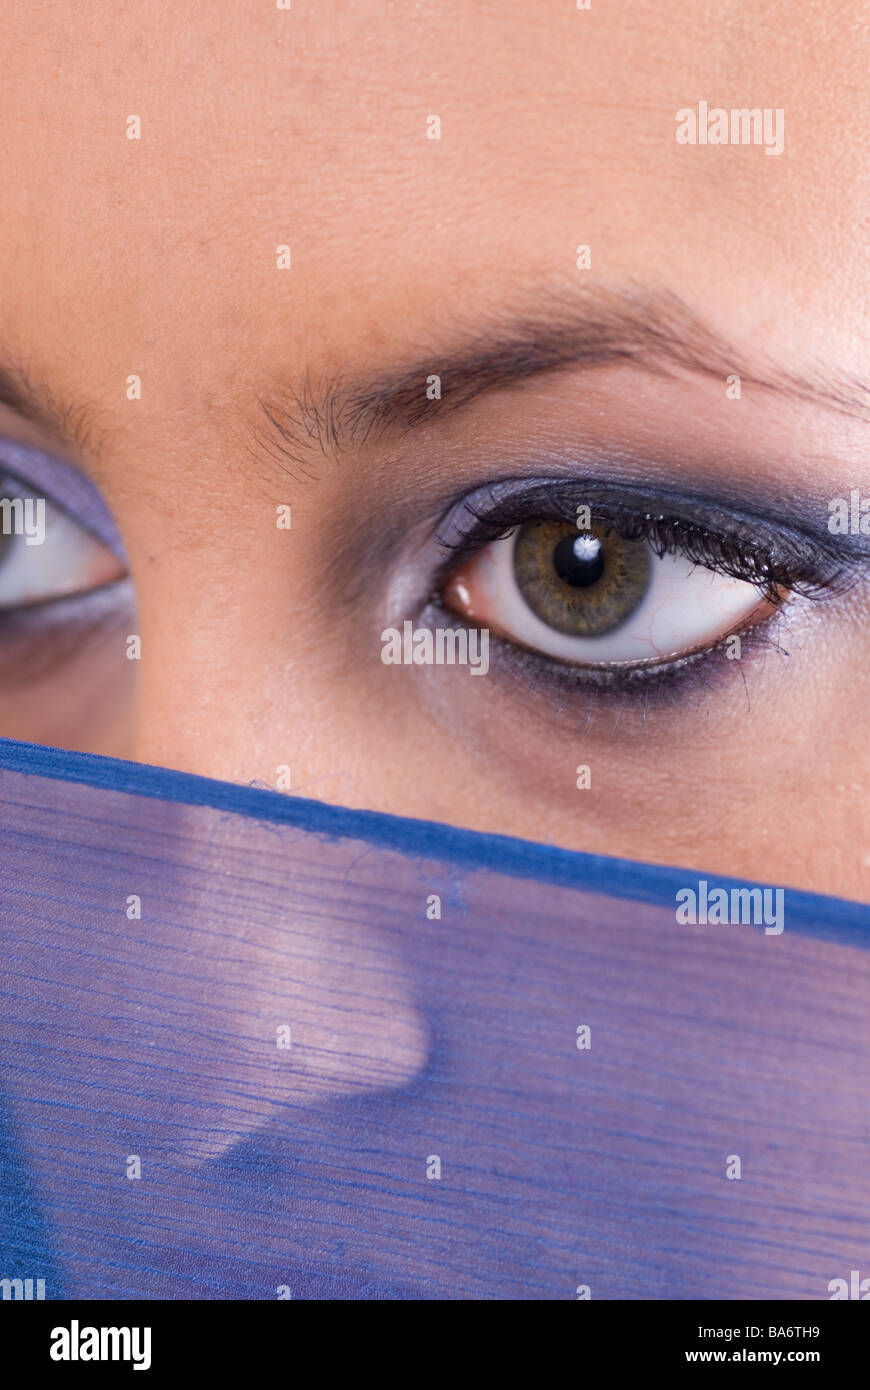 Young woman looking over a blue scarf Stock Photo